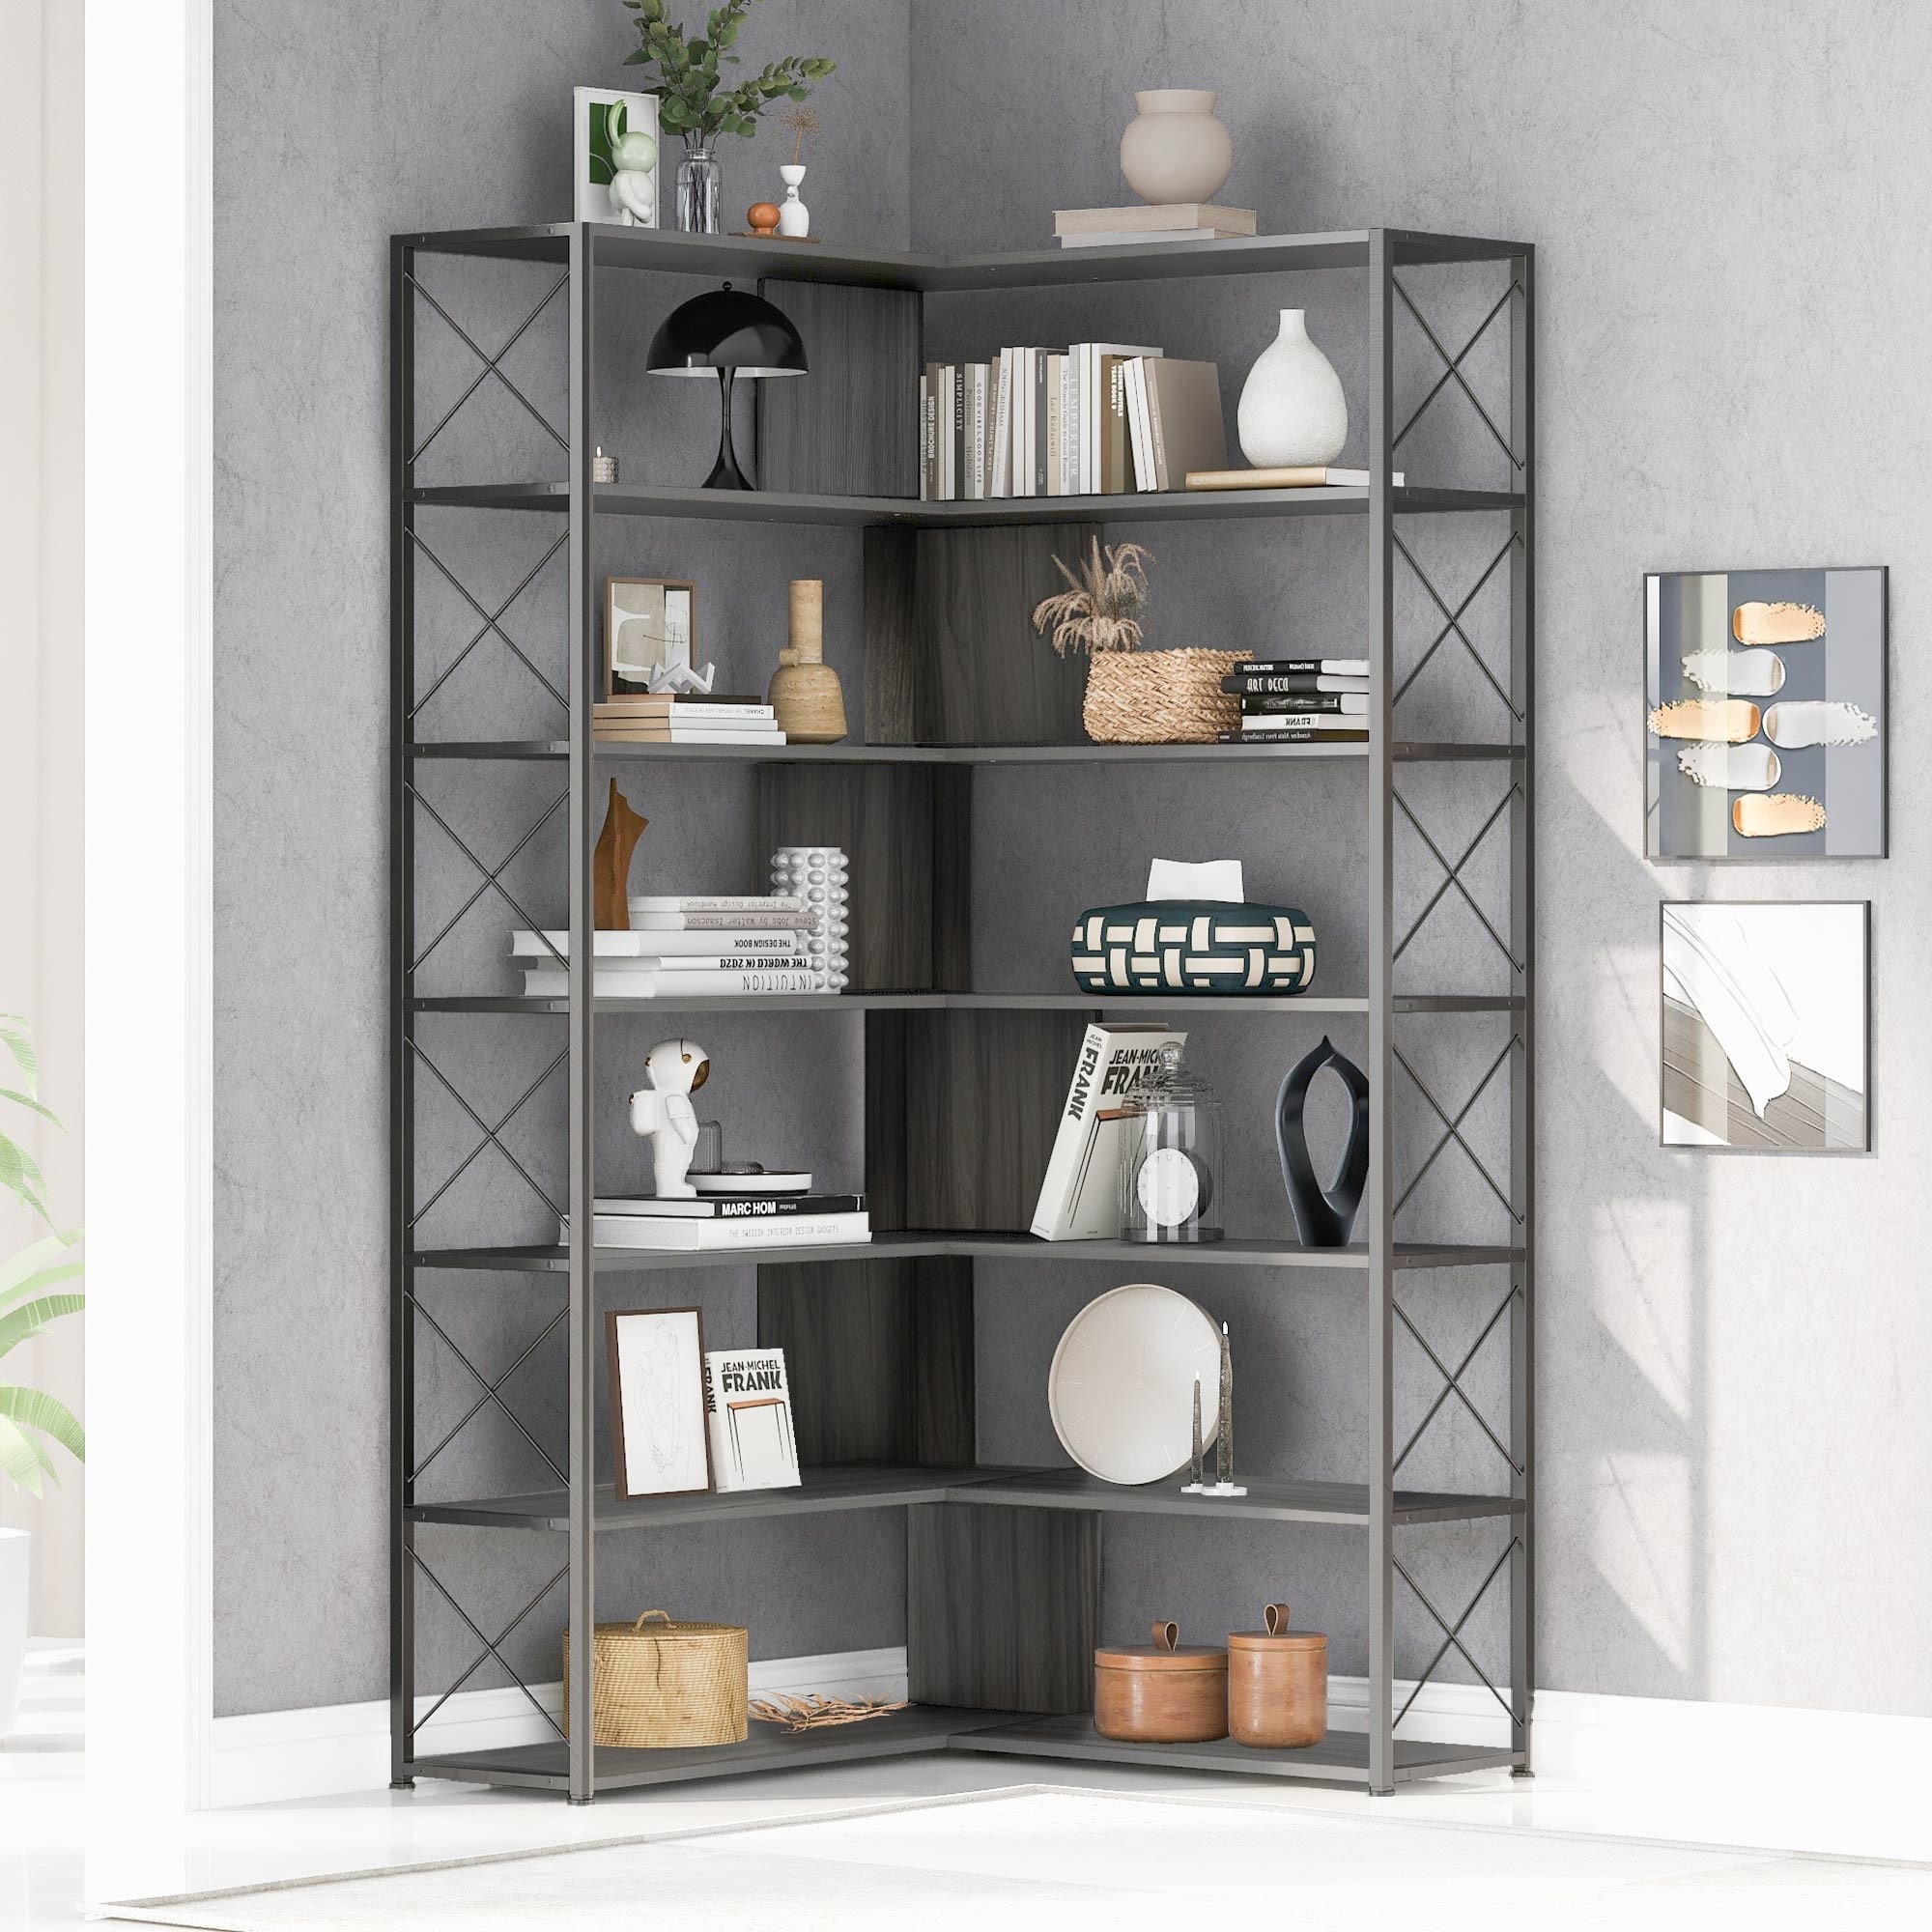 https://ak1.ostkcdn.com/images/products/is/images/direct/b2f28fedbb9f8ad43b41f4eae30bae917872e7fe/7-Tier-Bookcase-Home-Office-Bookshelf%2C-L-Shaped-Corner-Bookcase-with-Metal-Frame%2C-Industrial-Style-Shelf-with-Open-Storage.jpg